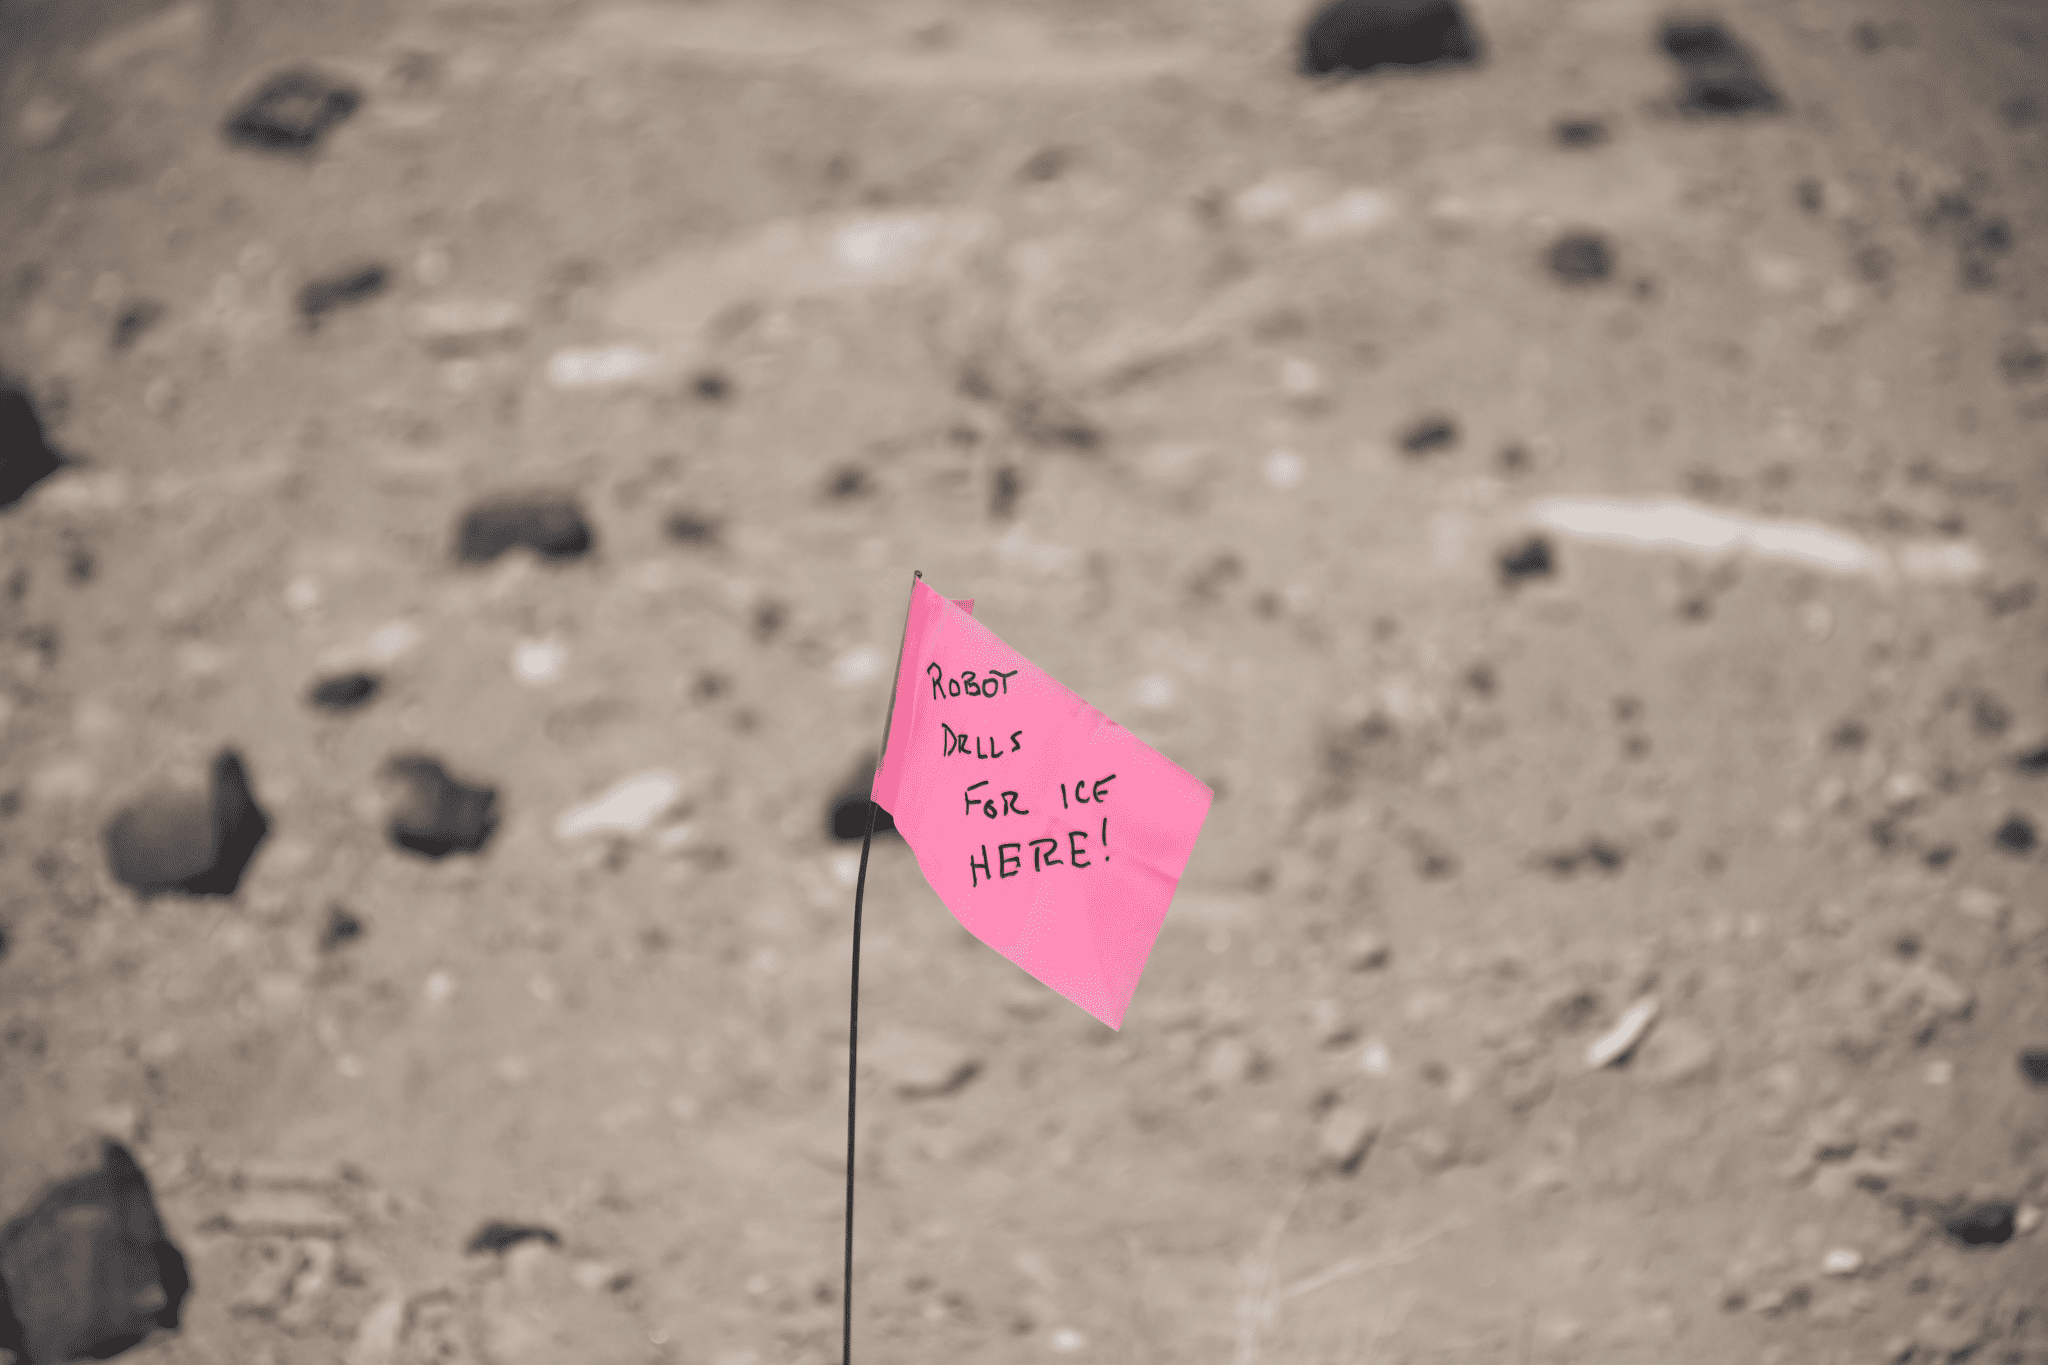 A pink flag planted in the ground in New Mexico's Potrillo Volcanic Field